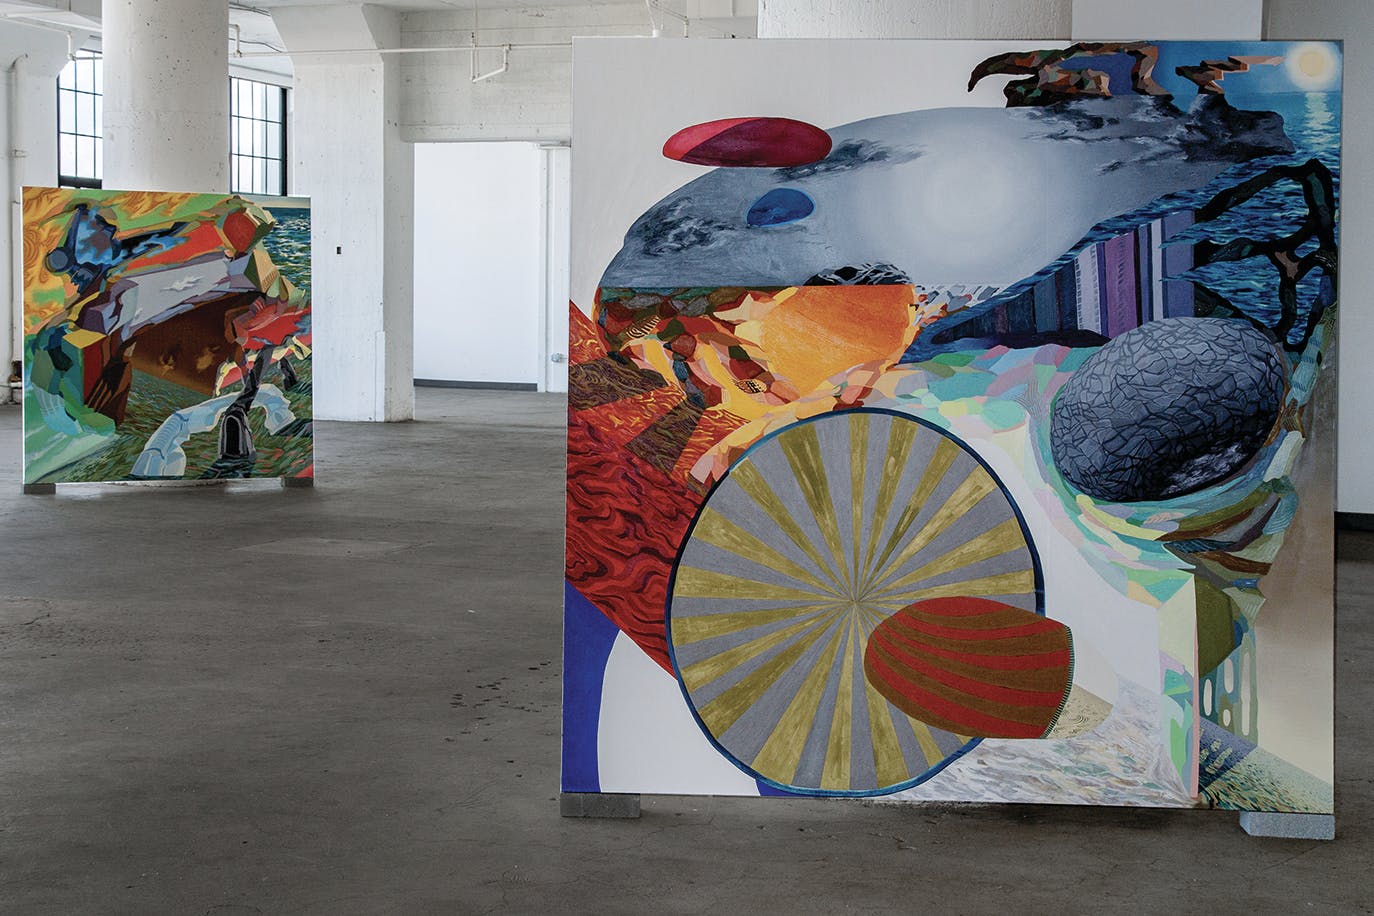 Colorful works by Christopher Schade represent passing islands.